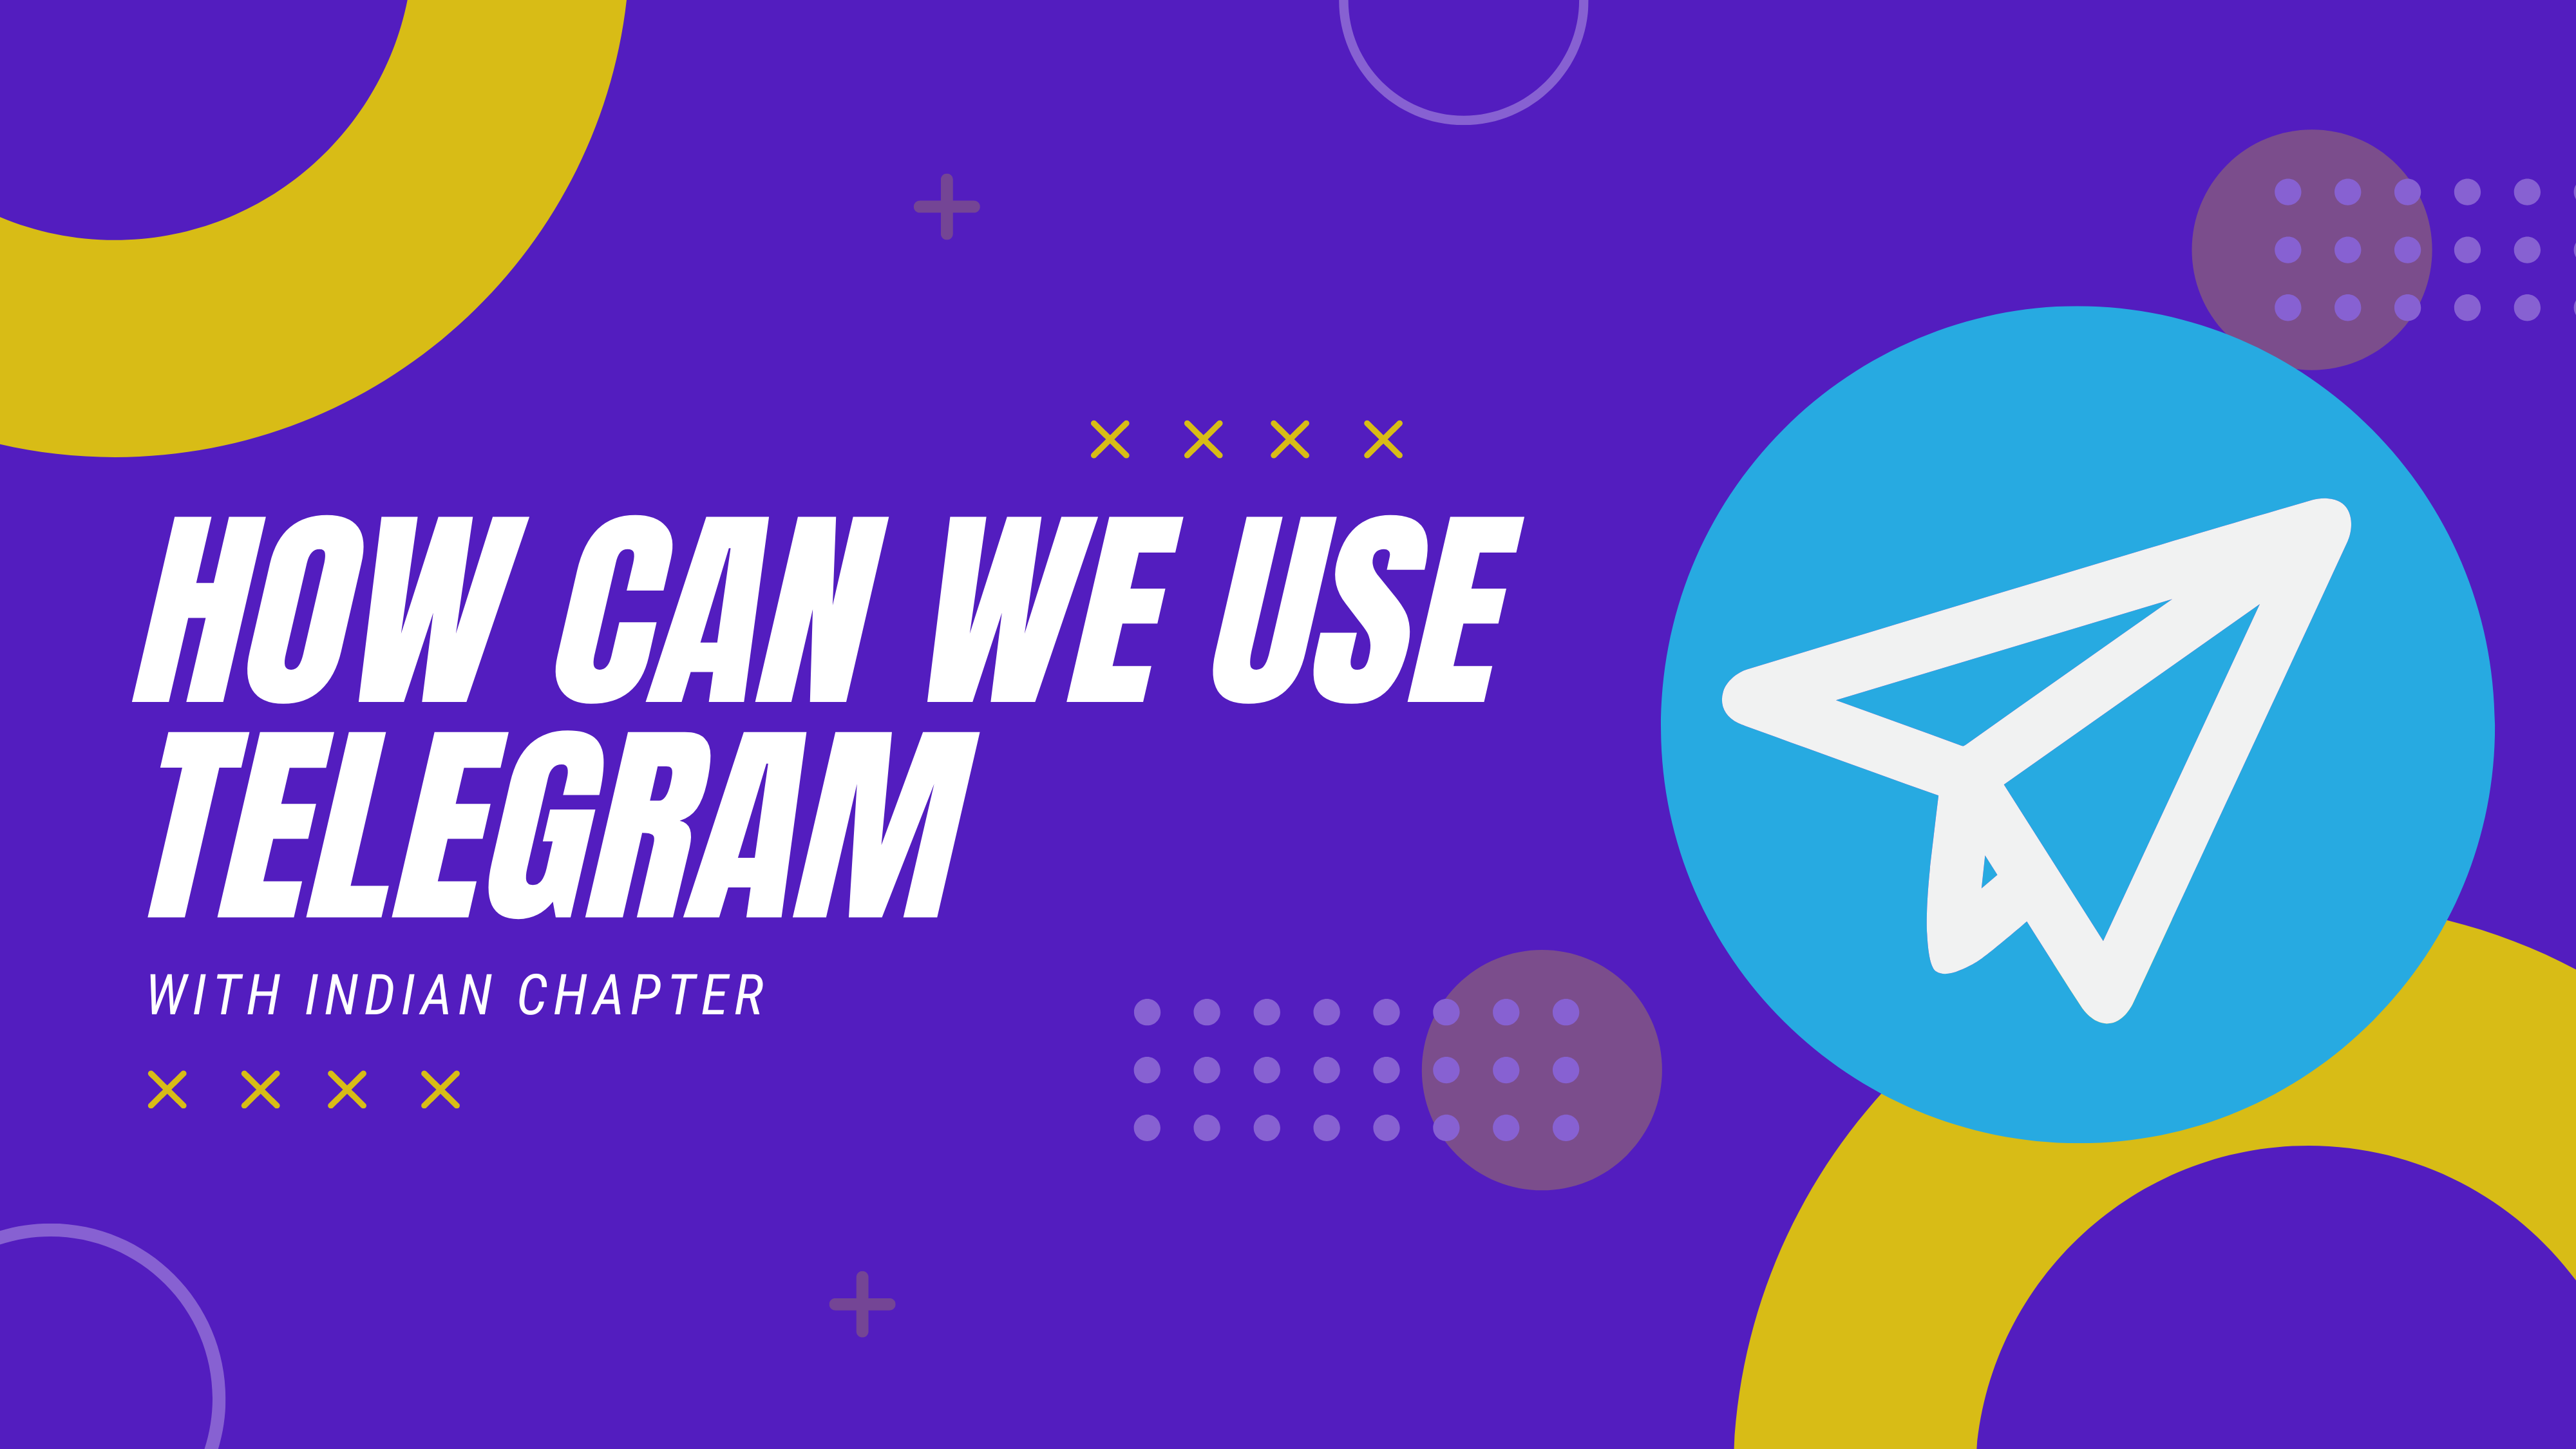 How can we use telegram